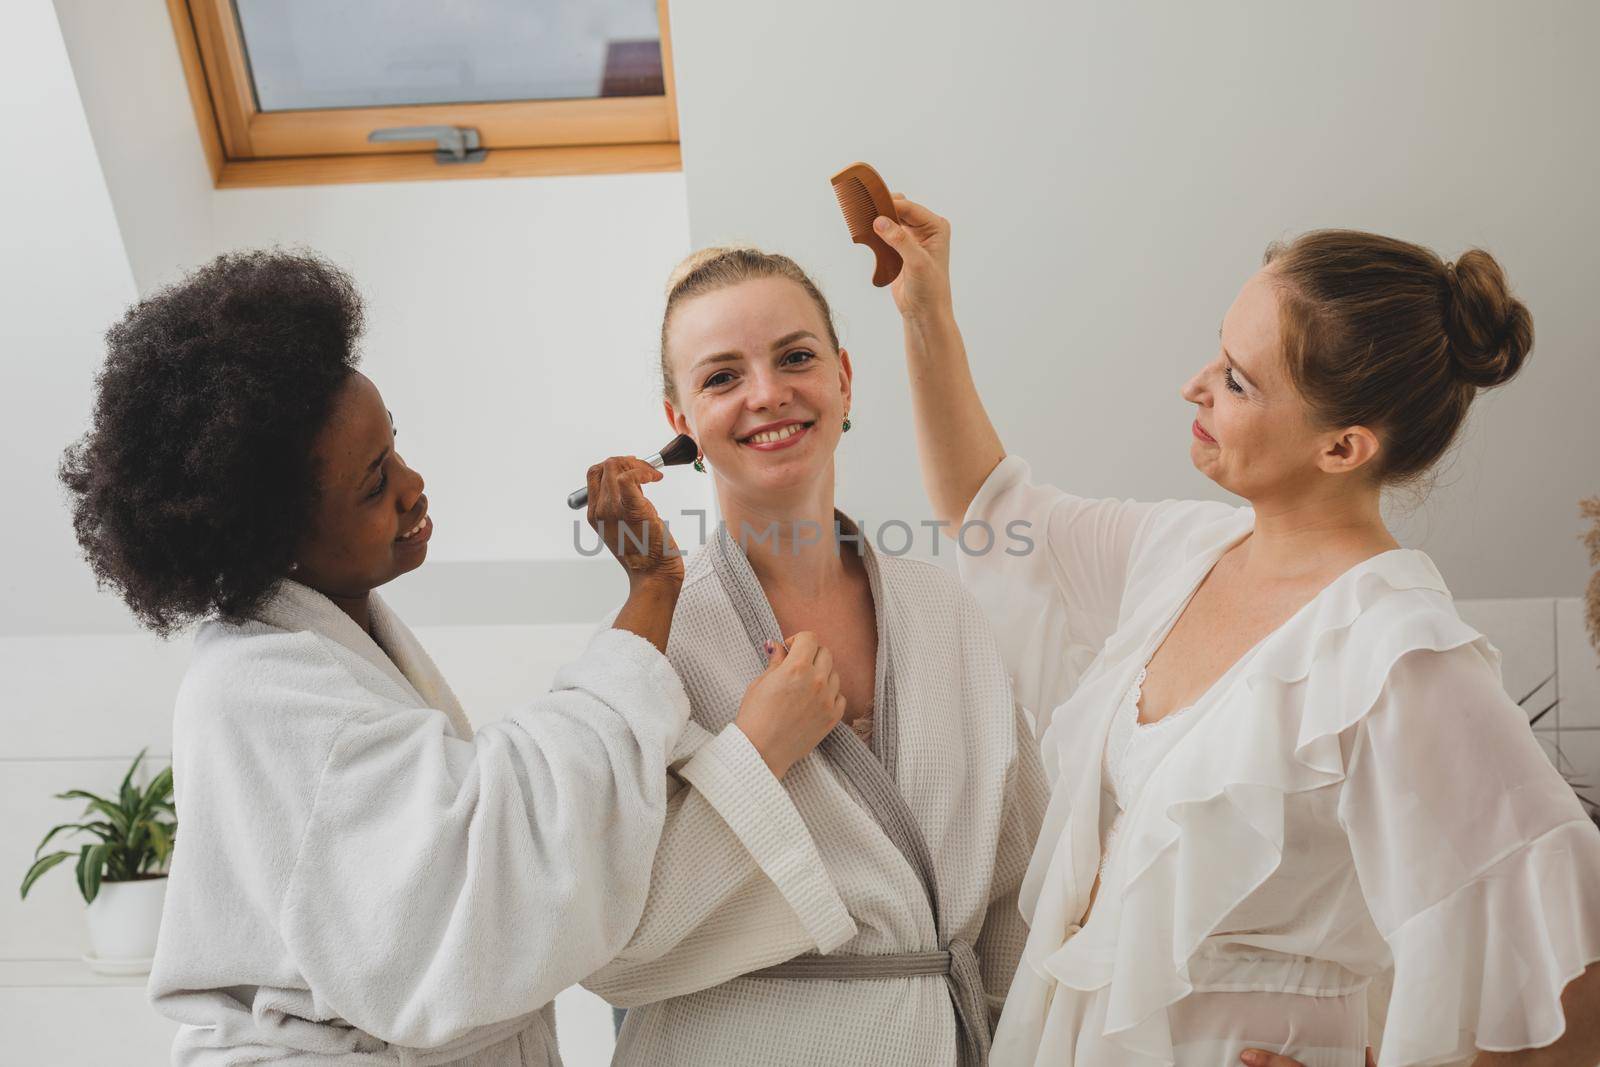 Three smiling young women in bathrobes have fun at the spa and beautify each other